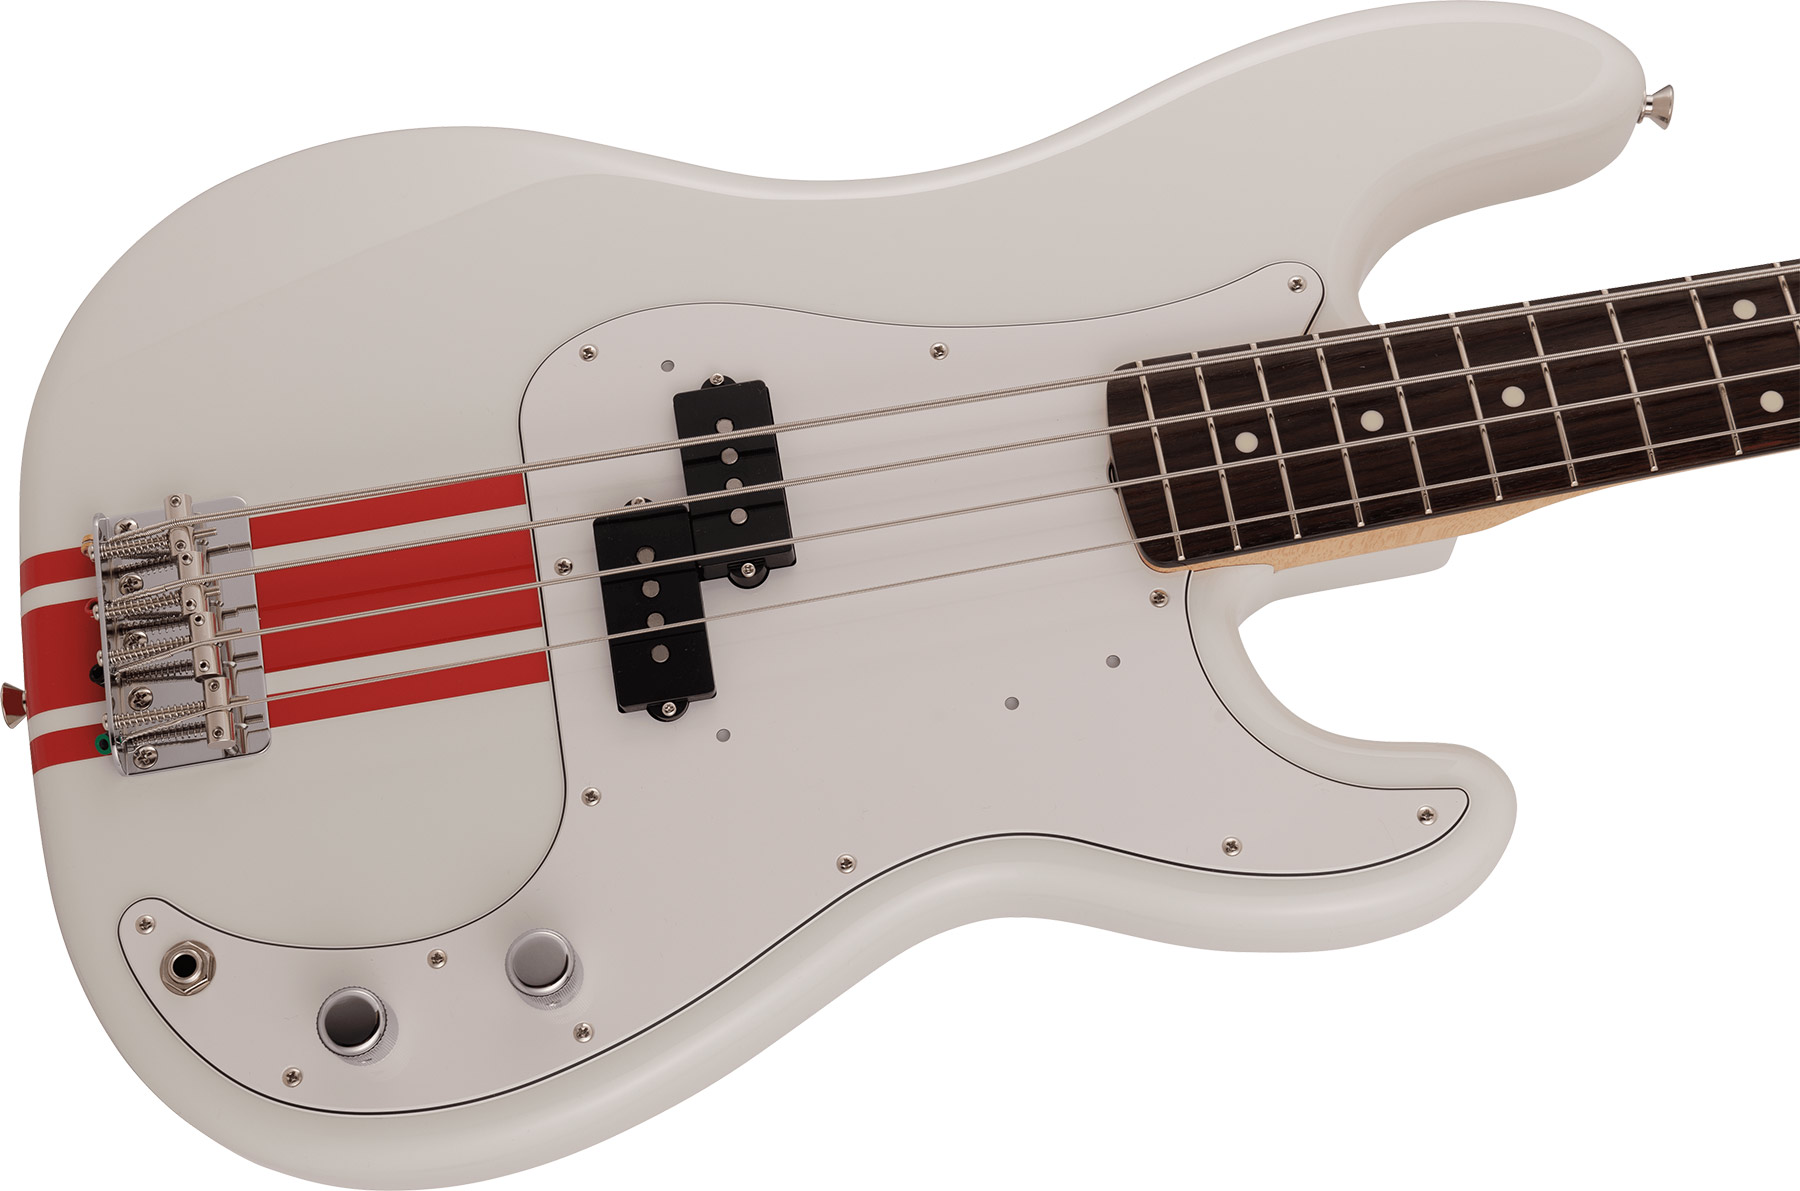 Fender Precision Bass Traditional 60s Mij Jap Rw - Olympic White W/ Red Competition Stripe - Solid body elektrische bas - Variation 2